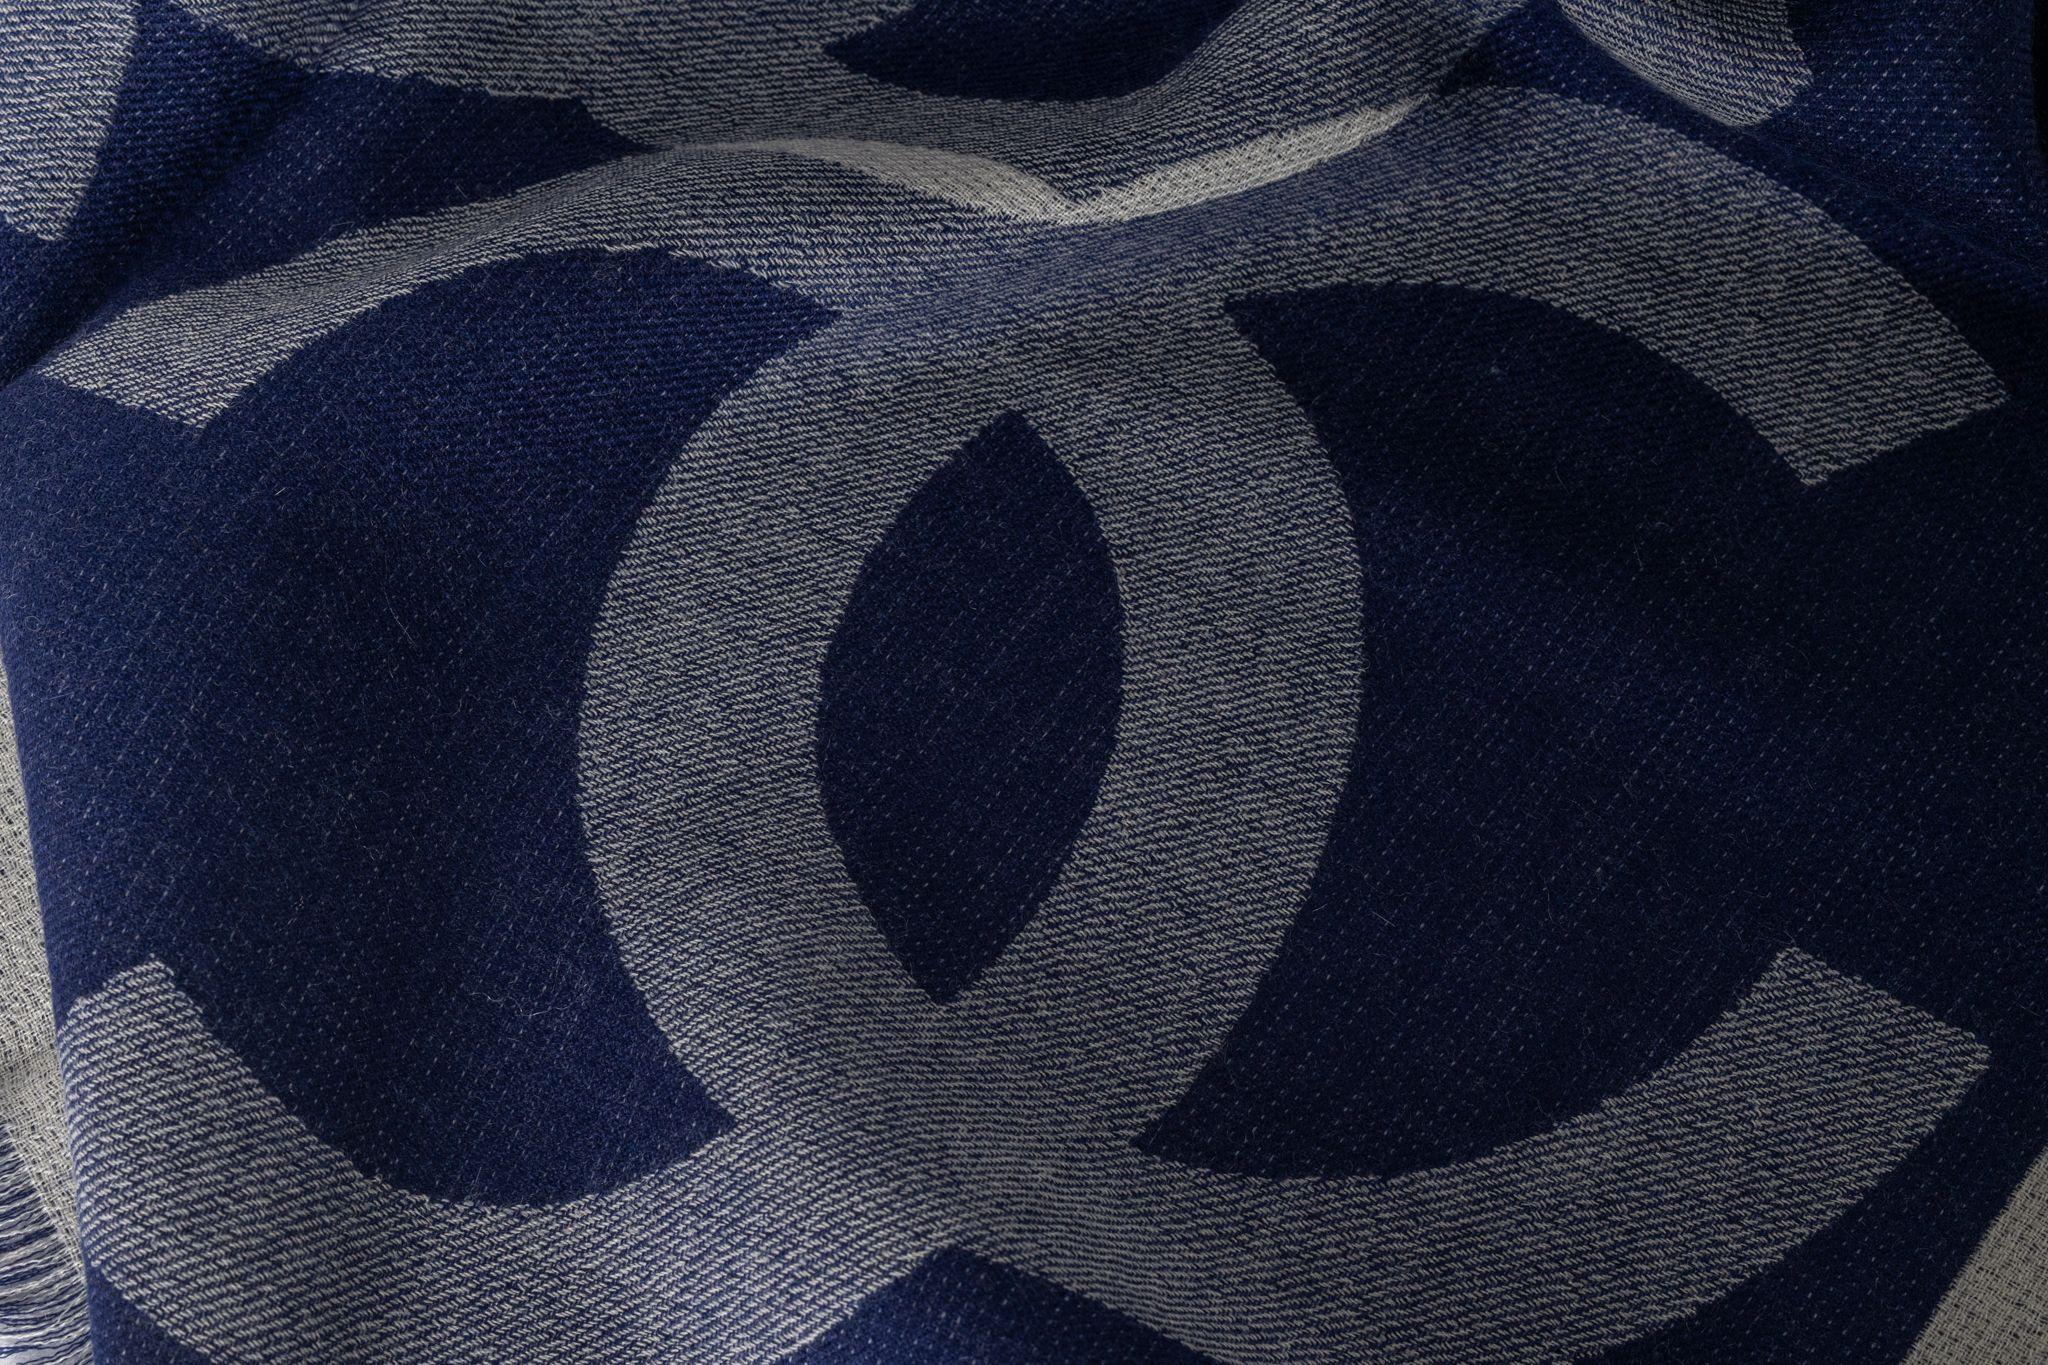 Chanel Cashmere Shawl in navy. The pattern features big overlapping CC logos. The item is in new condition.